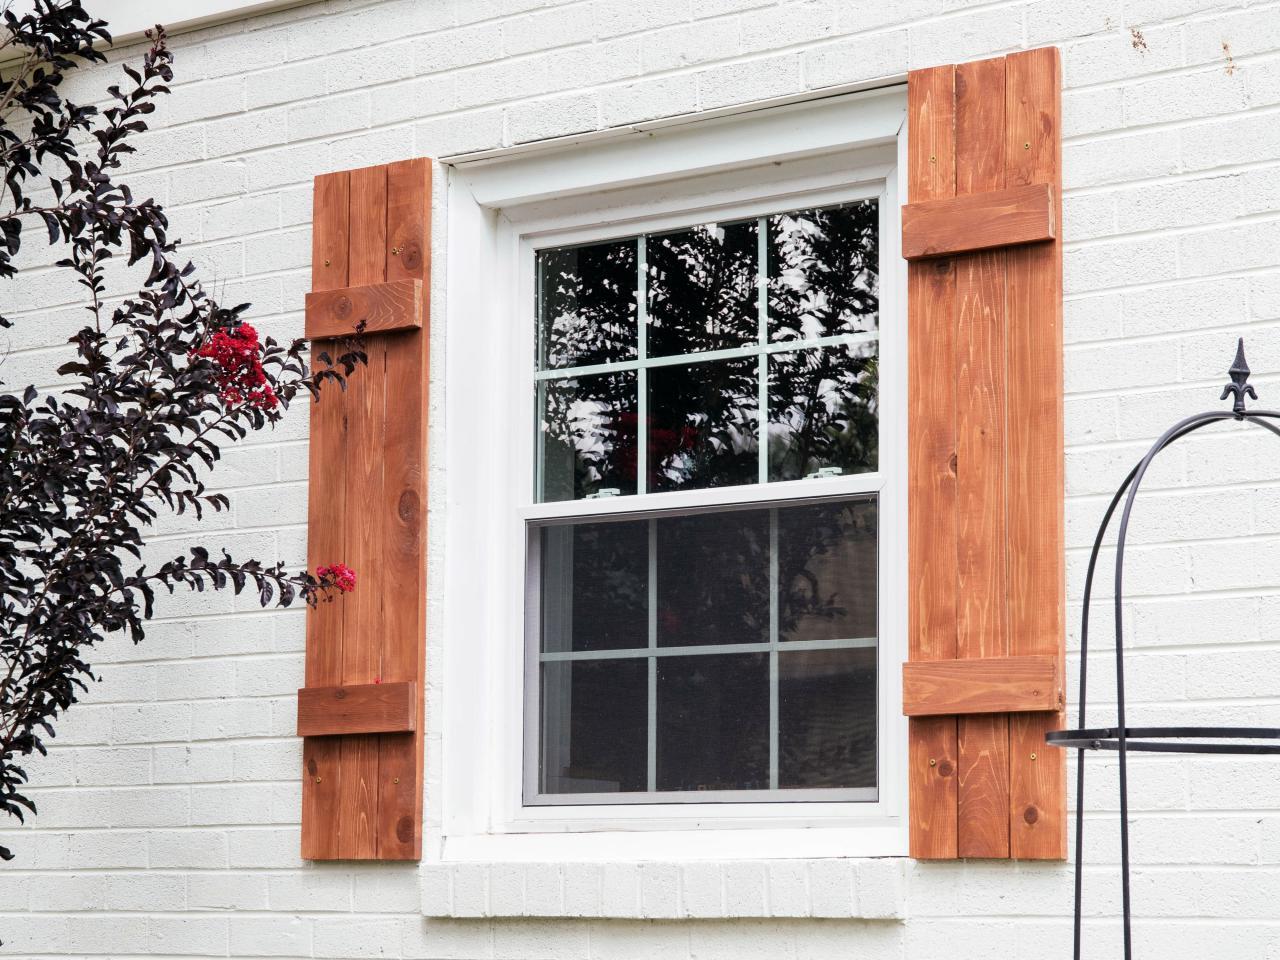 DIY Shutters: Transform Your Windows With These Easy Steps